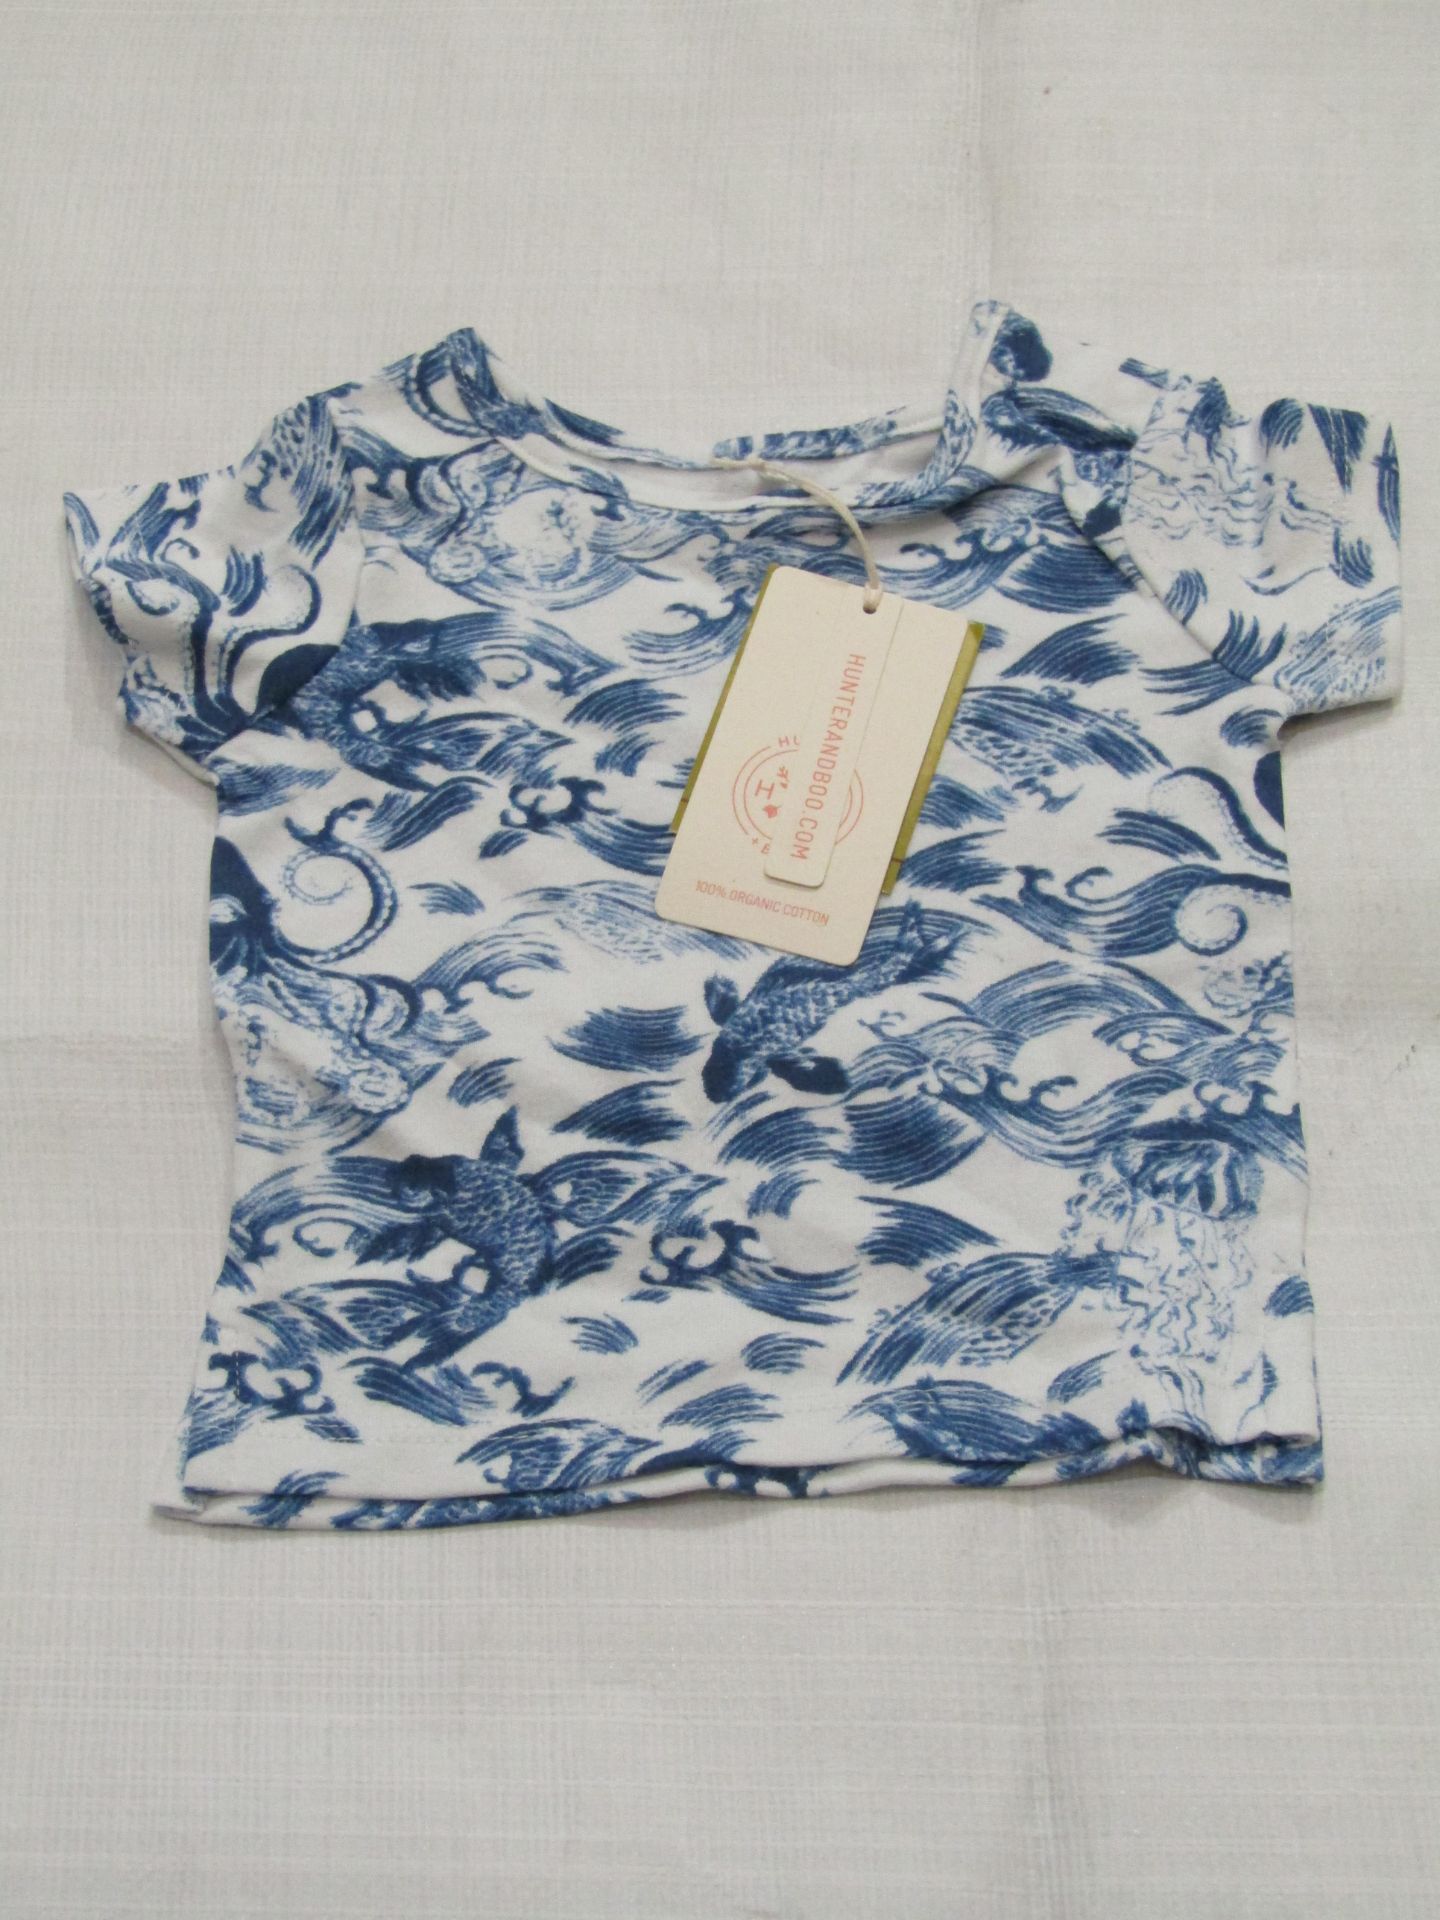 2 X Hunter & Boo Kayio Print T/Shirts Blue/White Aged 0-3 Months New & Packaged RRP £13 Each